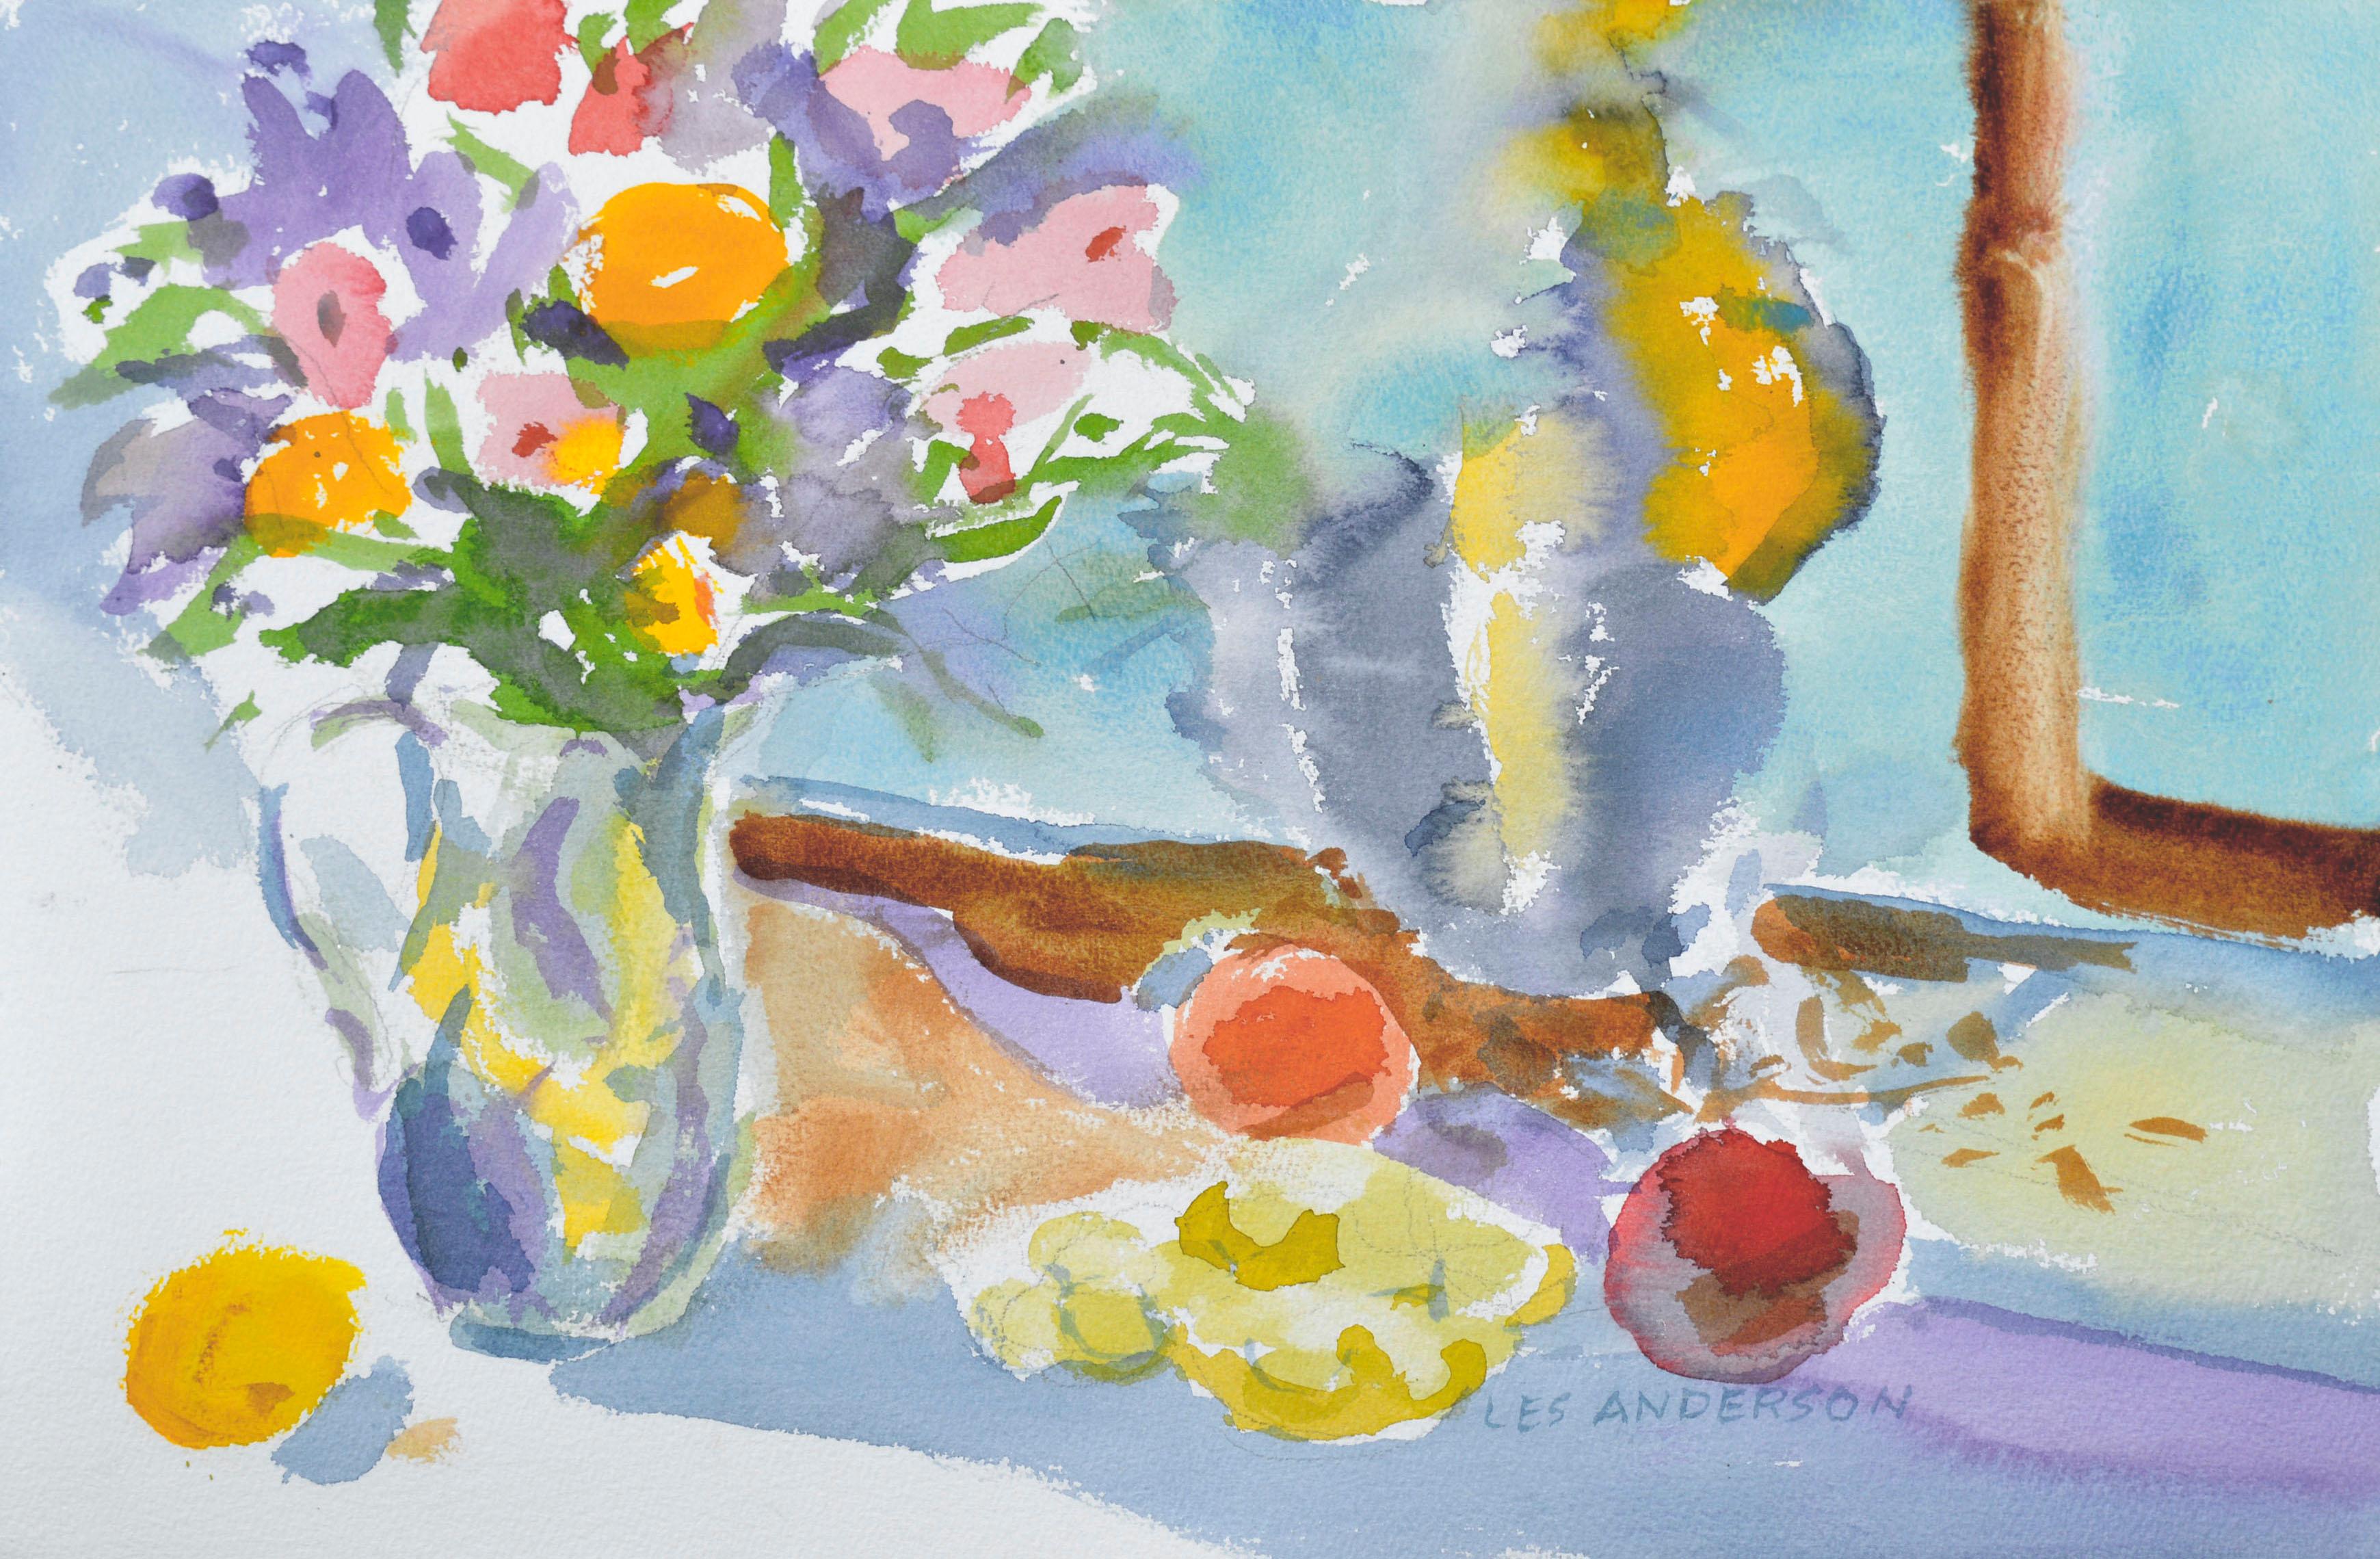 Les Anderson Still-Life - Spring Table Still Life with Floral Bouquet & Fruit